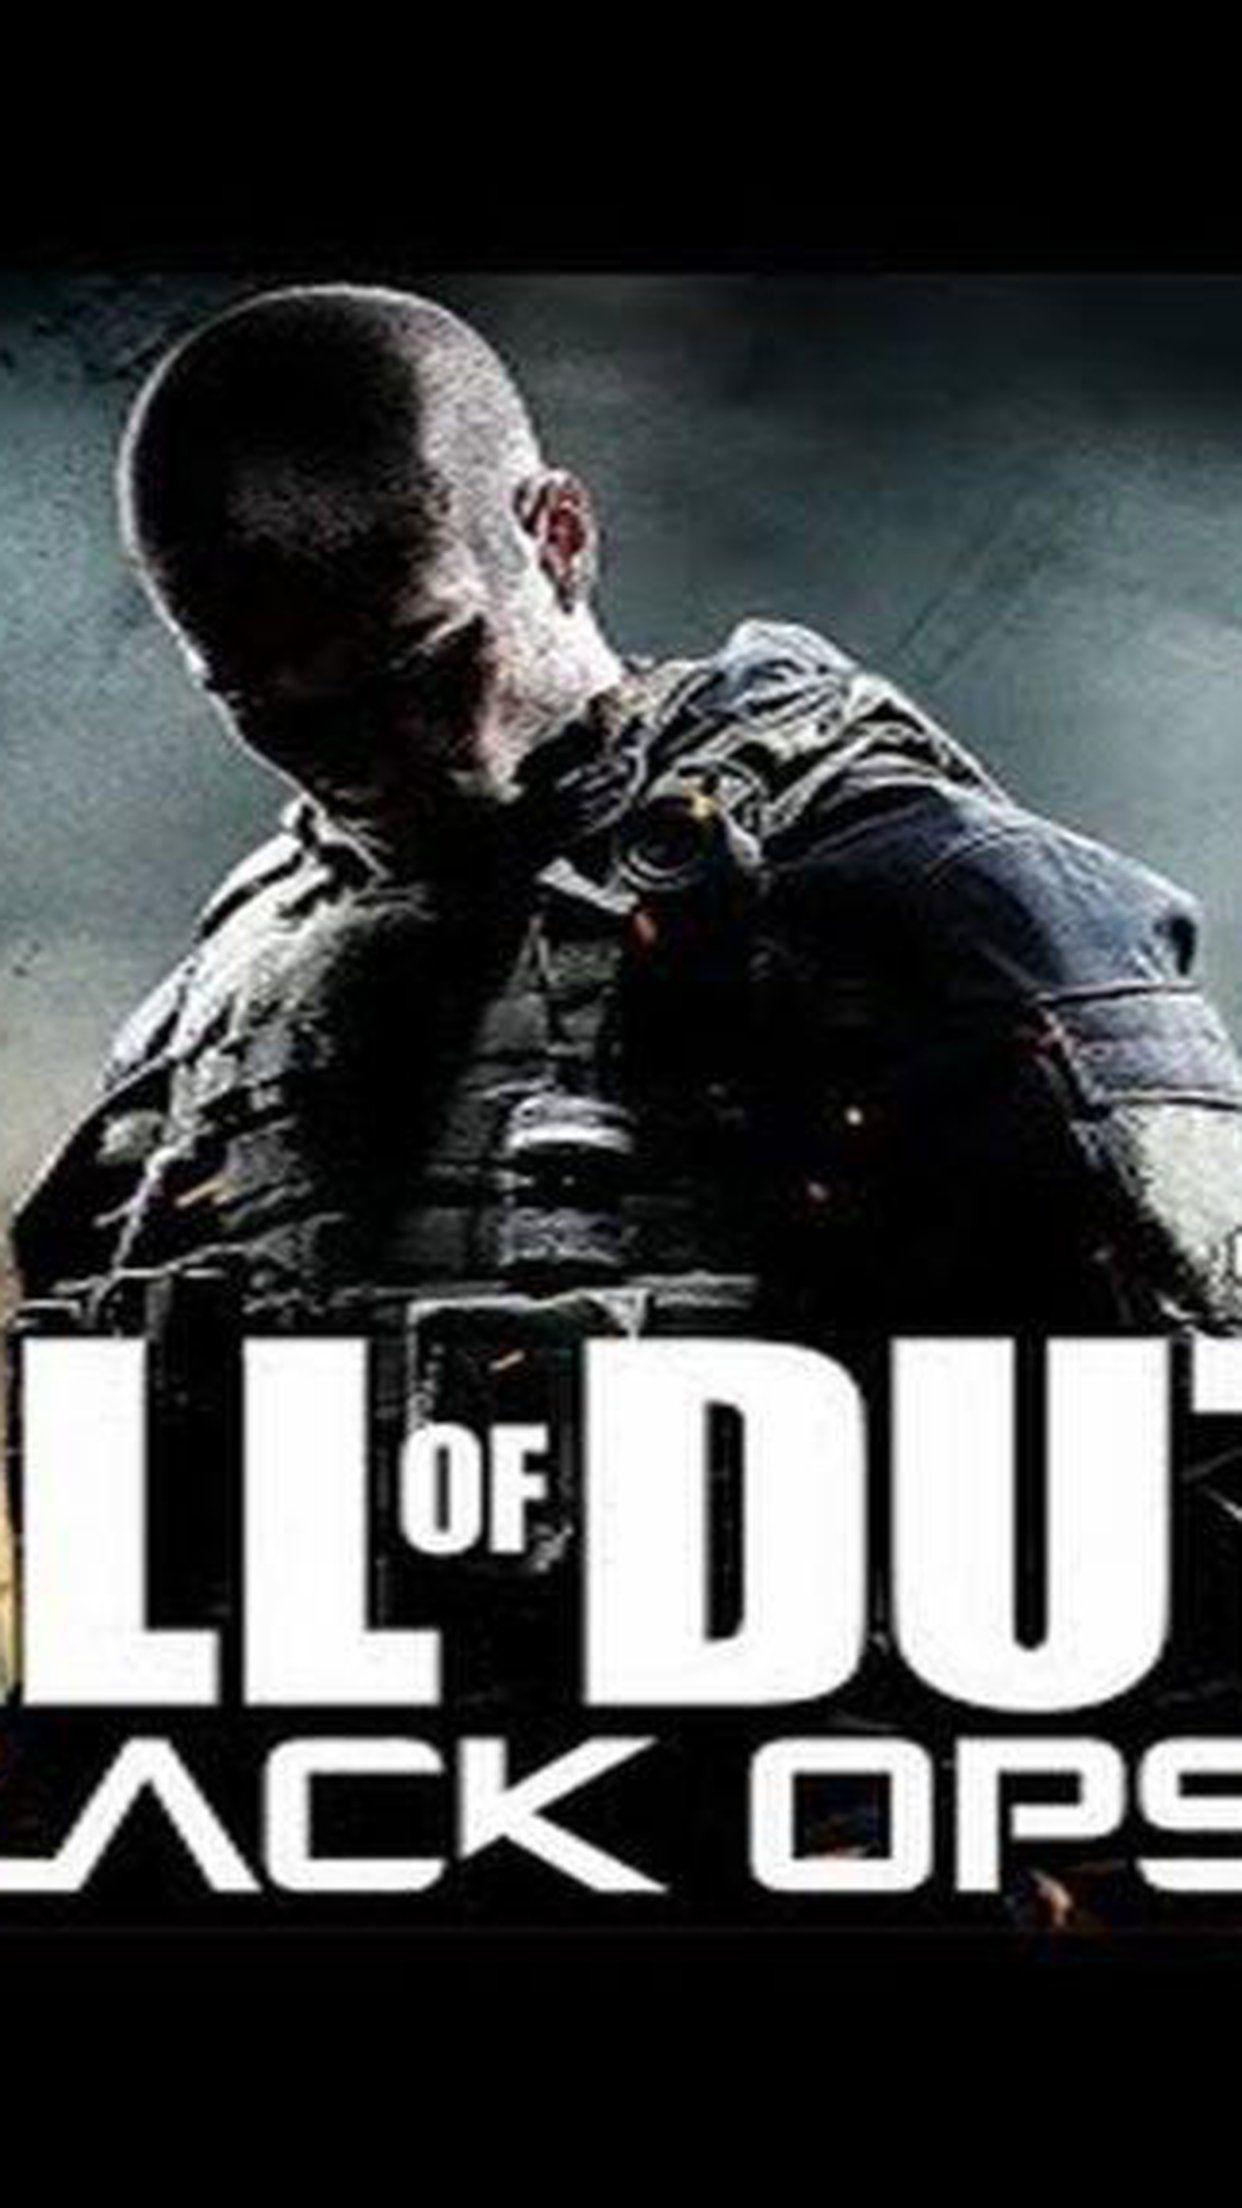 Call Of Duty Black Ops Iphone Wallpapers Top Free Call Of